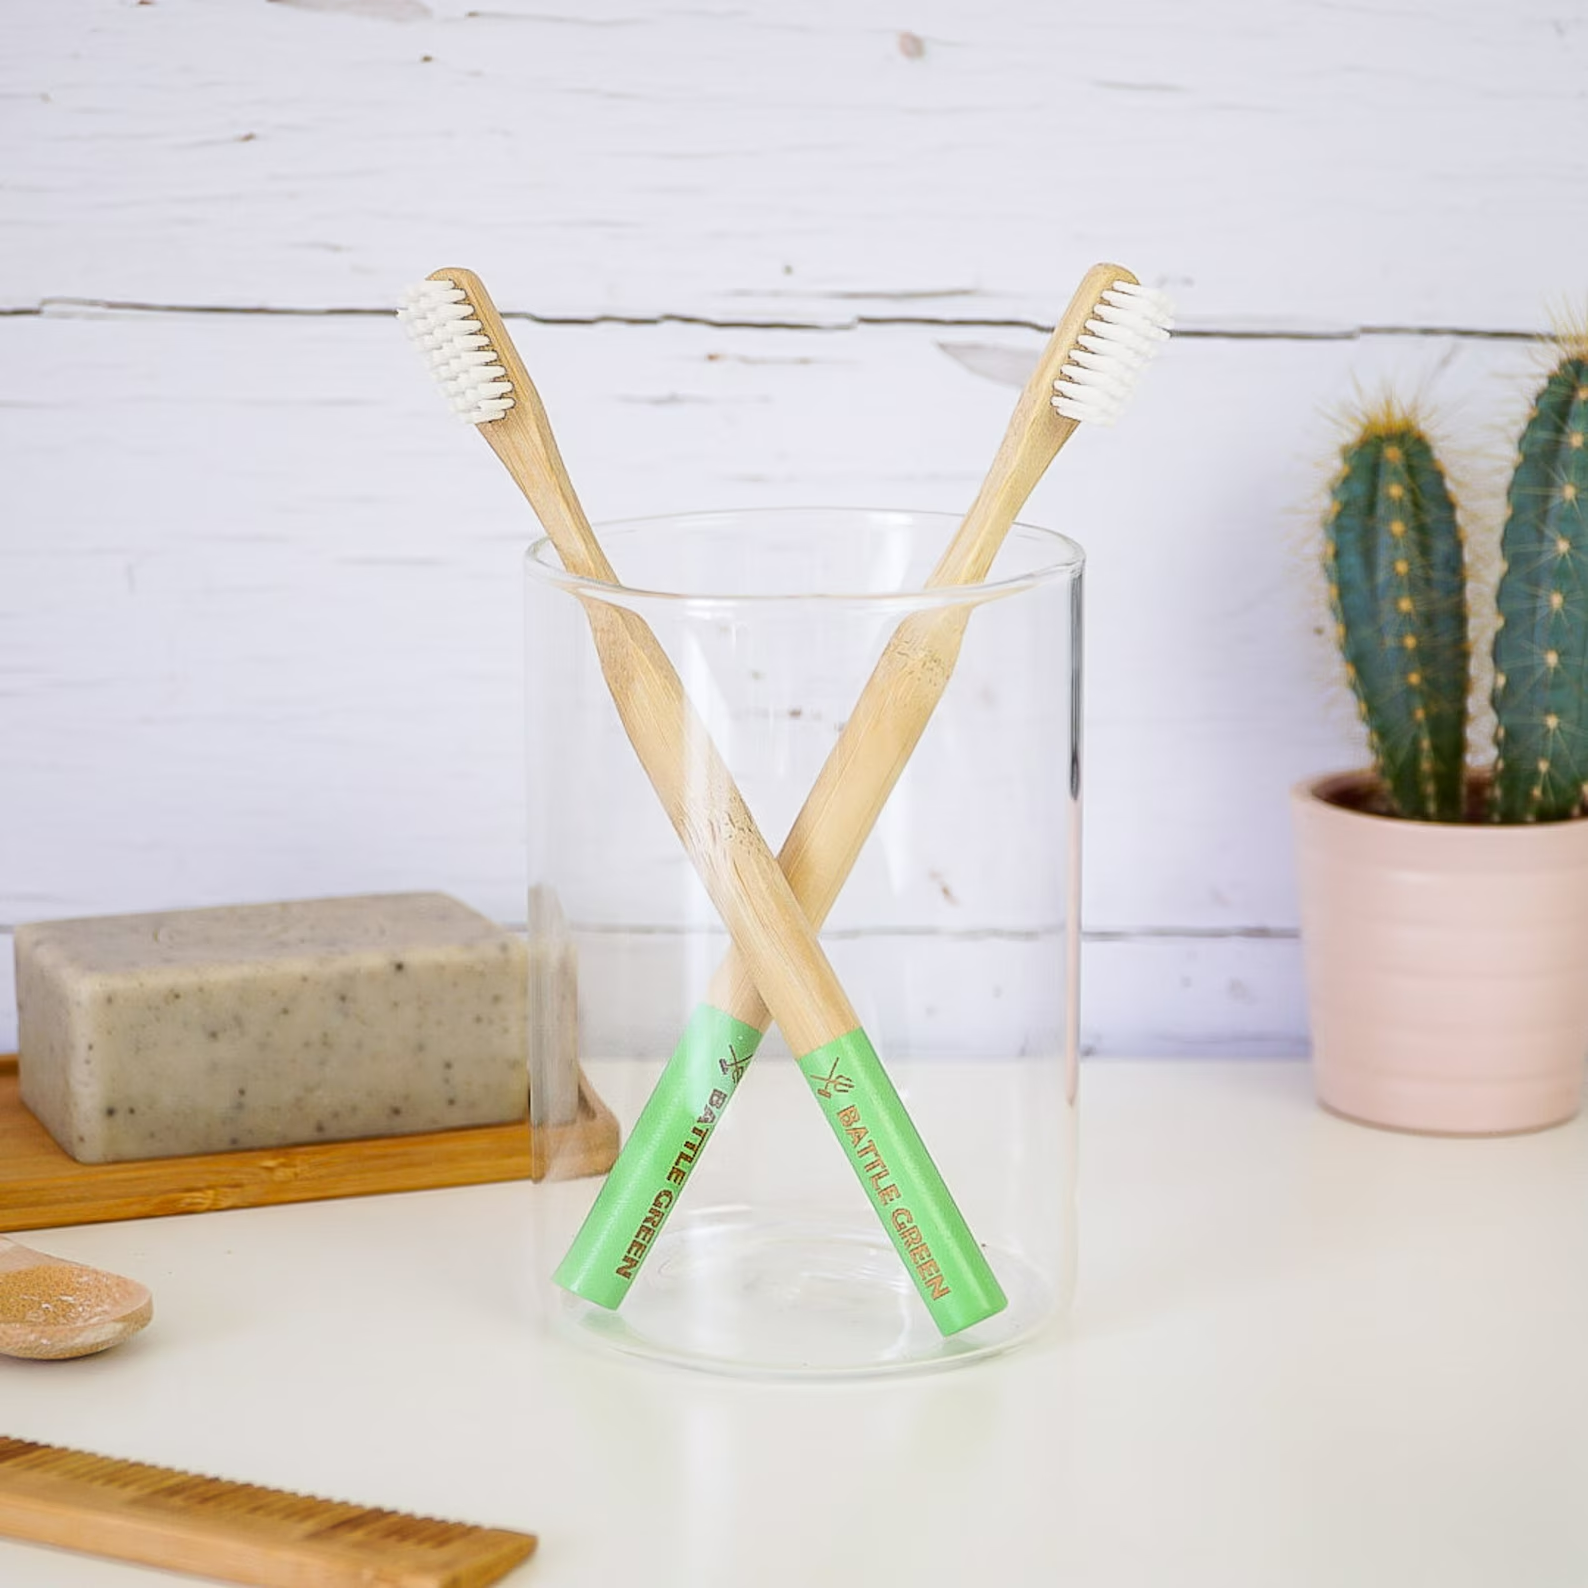 switch to a zero waste or reusable toothbrush